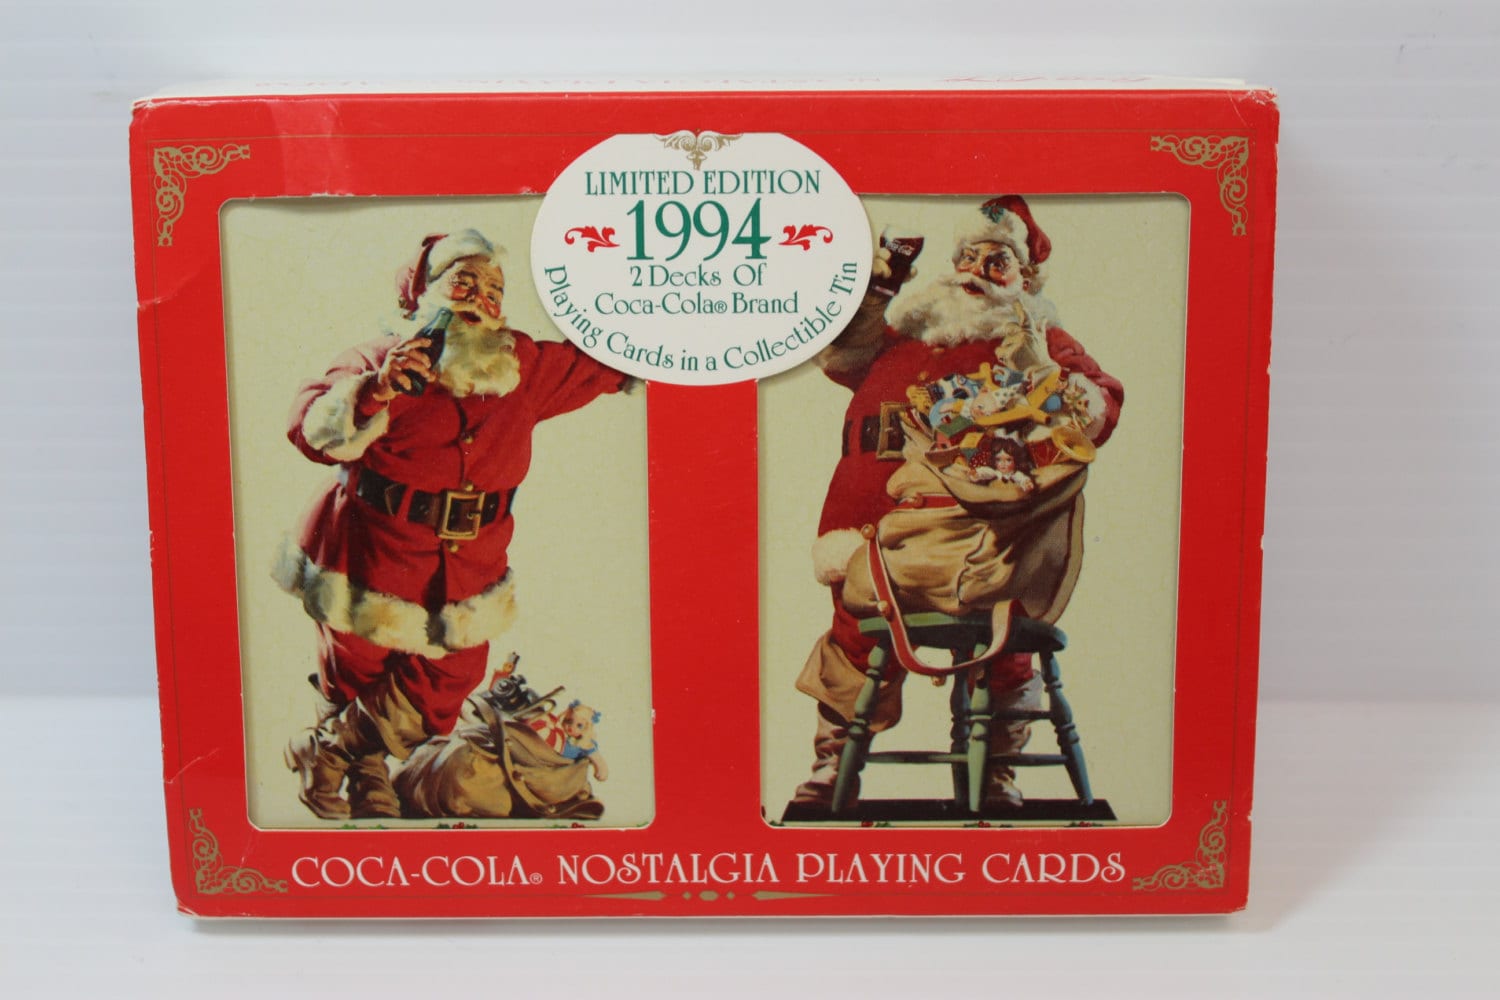 COCA COLA CARDS Vintage Coke playing cards collectible Coke